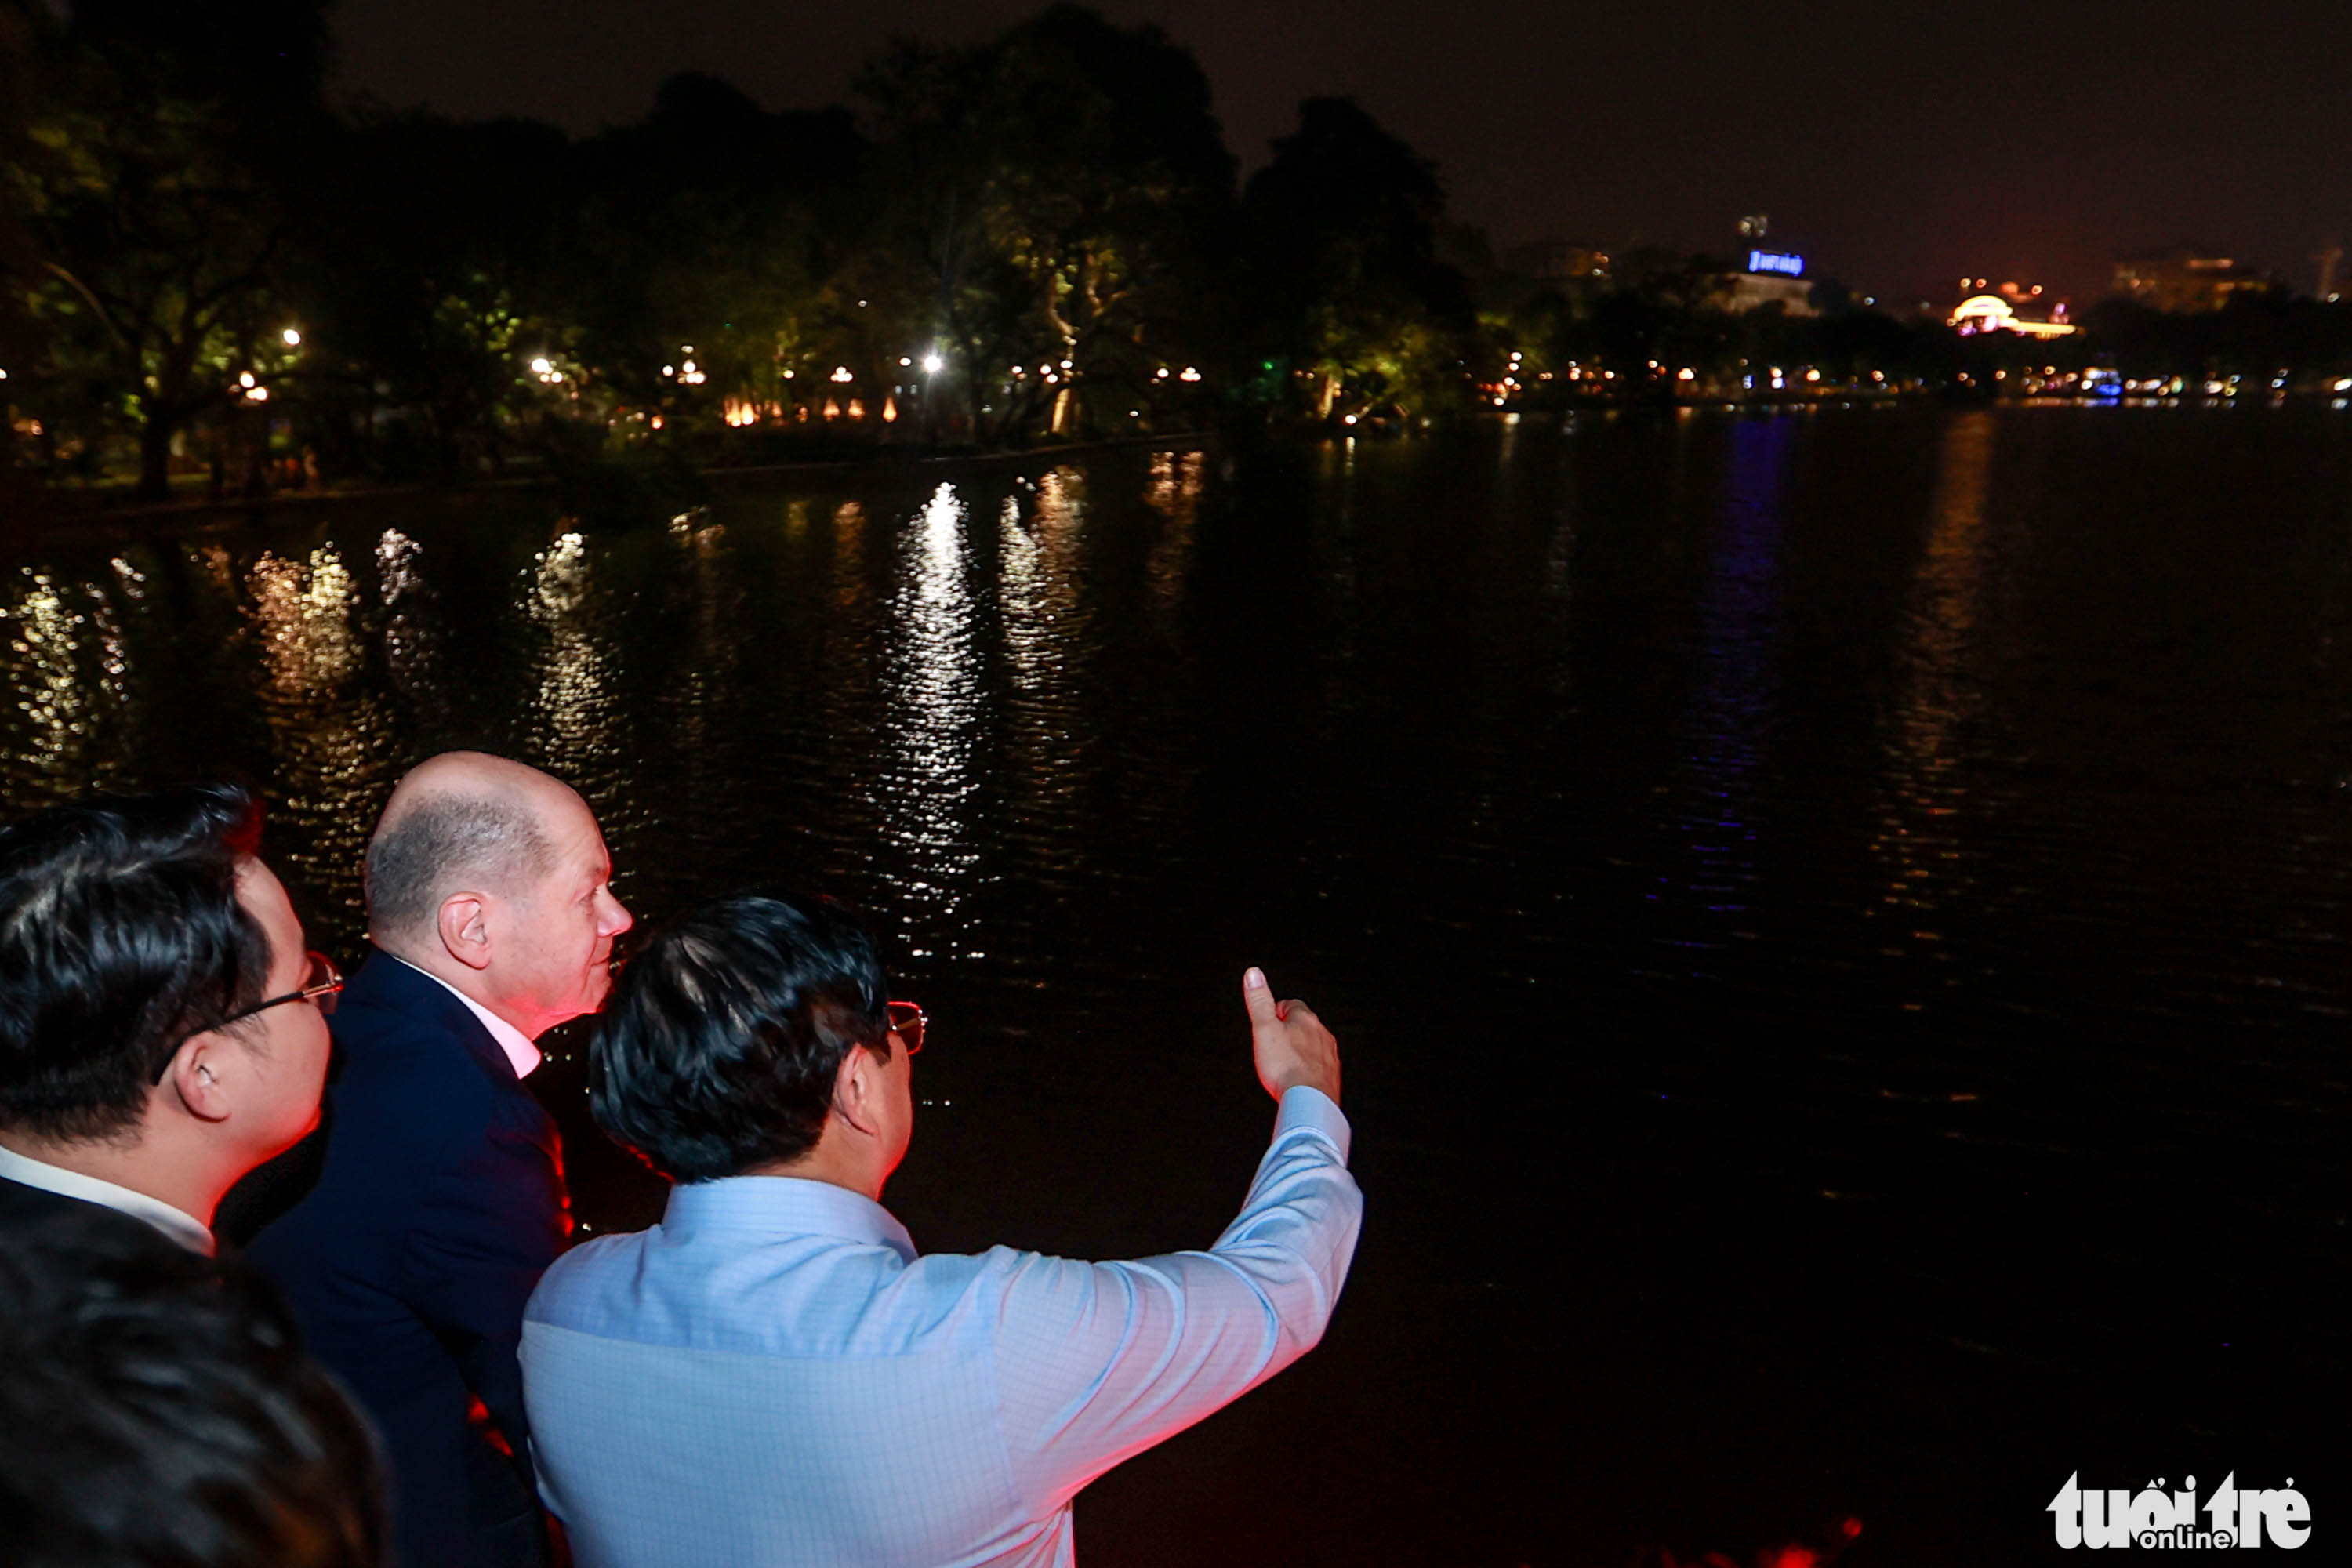 Prime Minister Pham Minh Chinh introduces to Chancellor Olaf Scholz the history of Ngoc Son Temple and Hoan Kiem Lake in Hanoi, November 13, 2022. Photo: Nguyen Khanh / Tuoi Tre